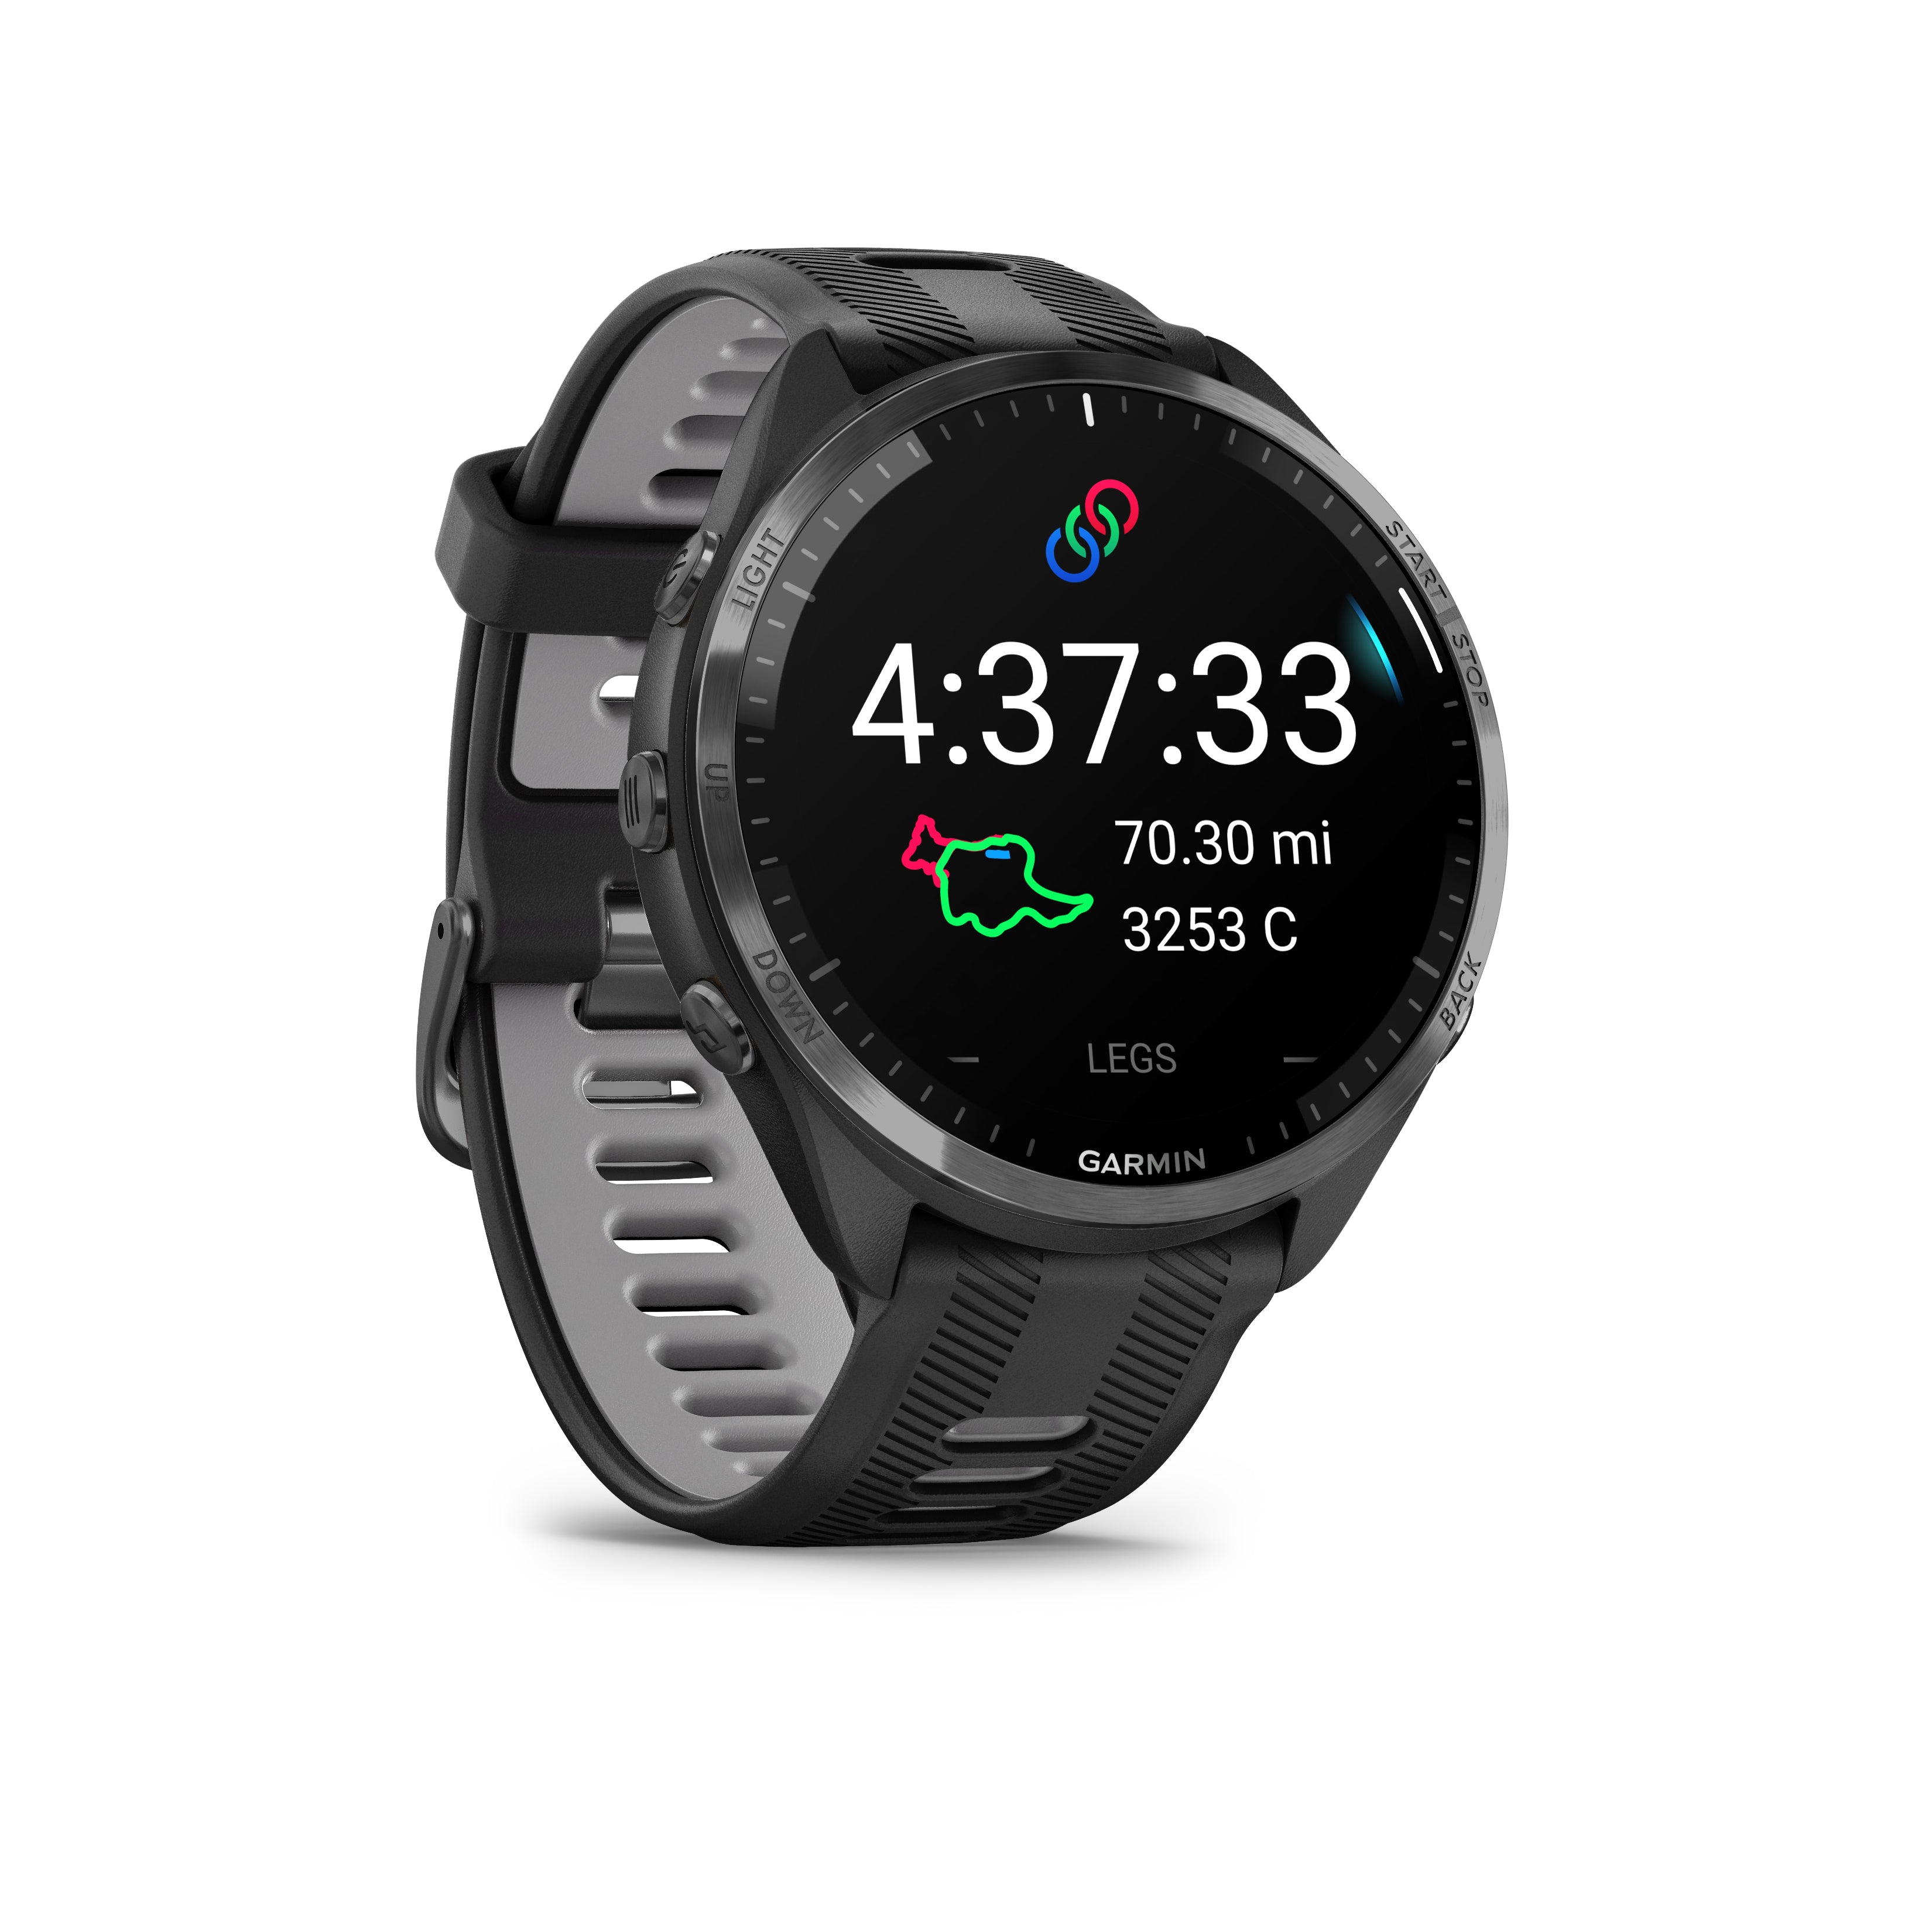 Garmin's Forerunner 265 and 965 are bright additions to the lineup